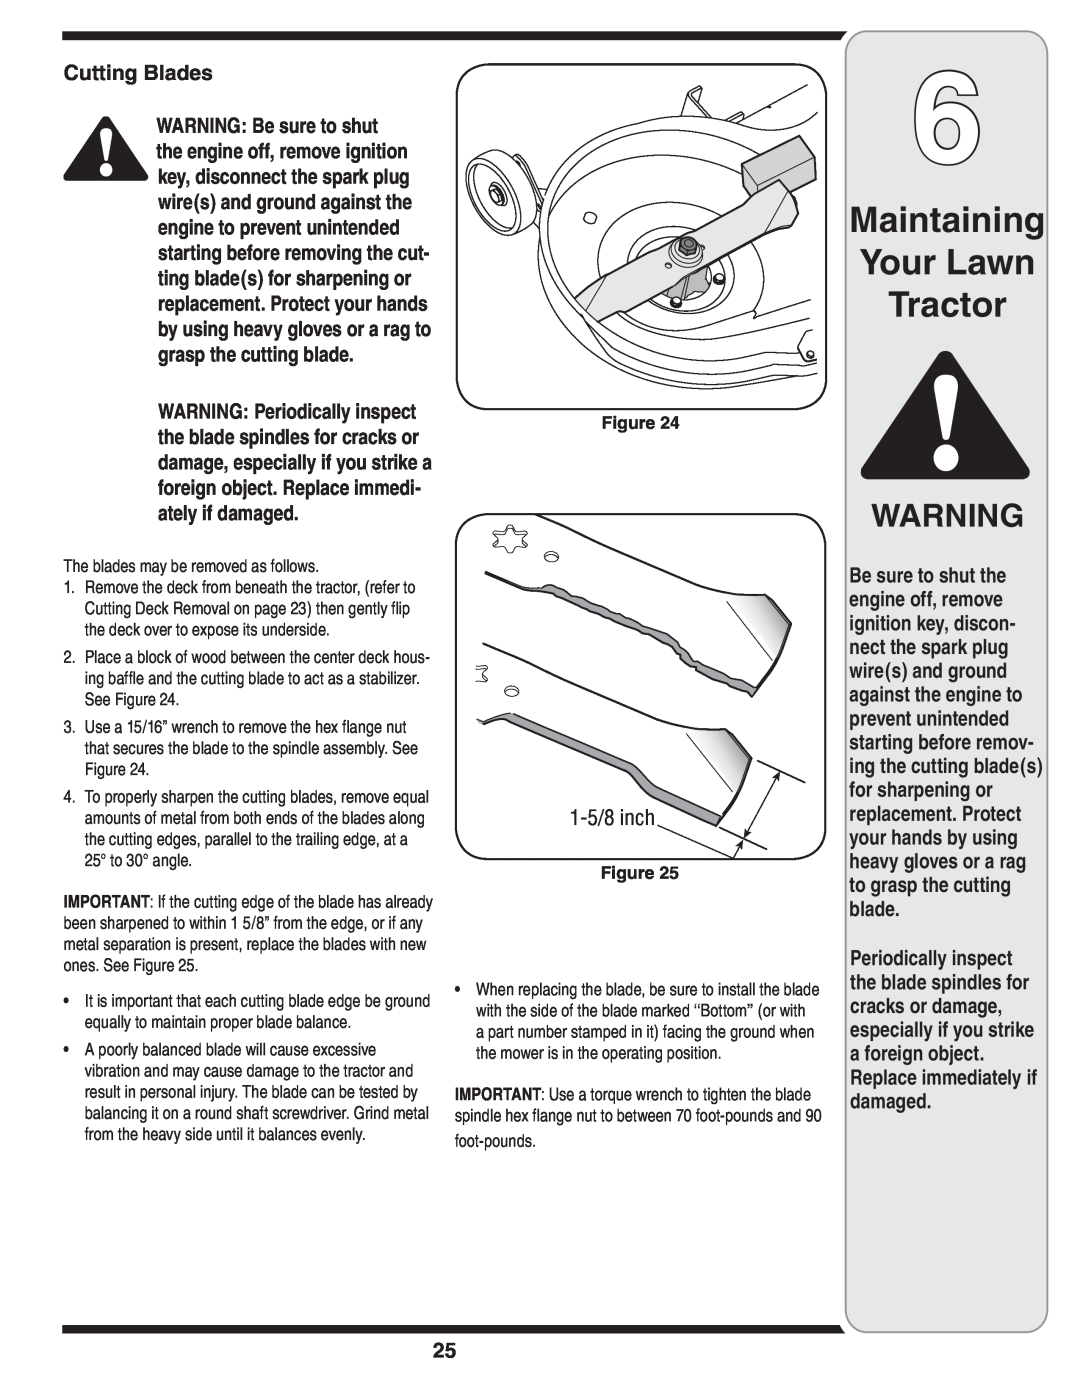 MTD 760, 779, 760-779 warranty Cutting Blades, Maintaining Your Lawn Tractor 